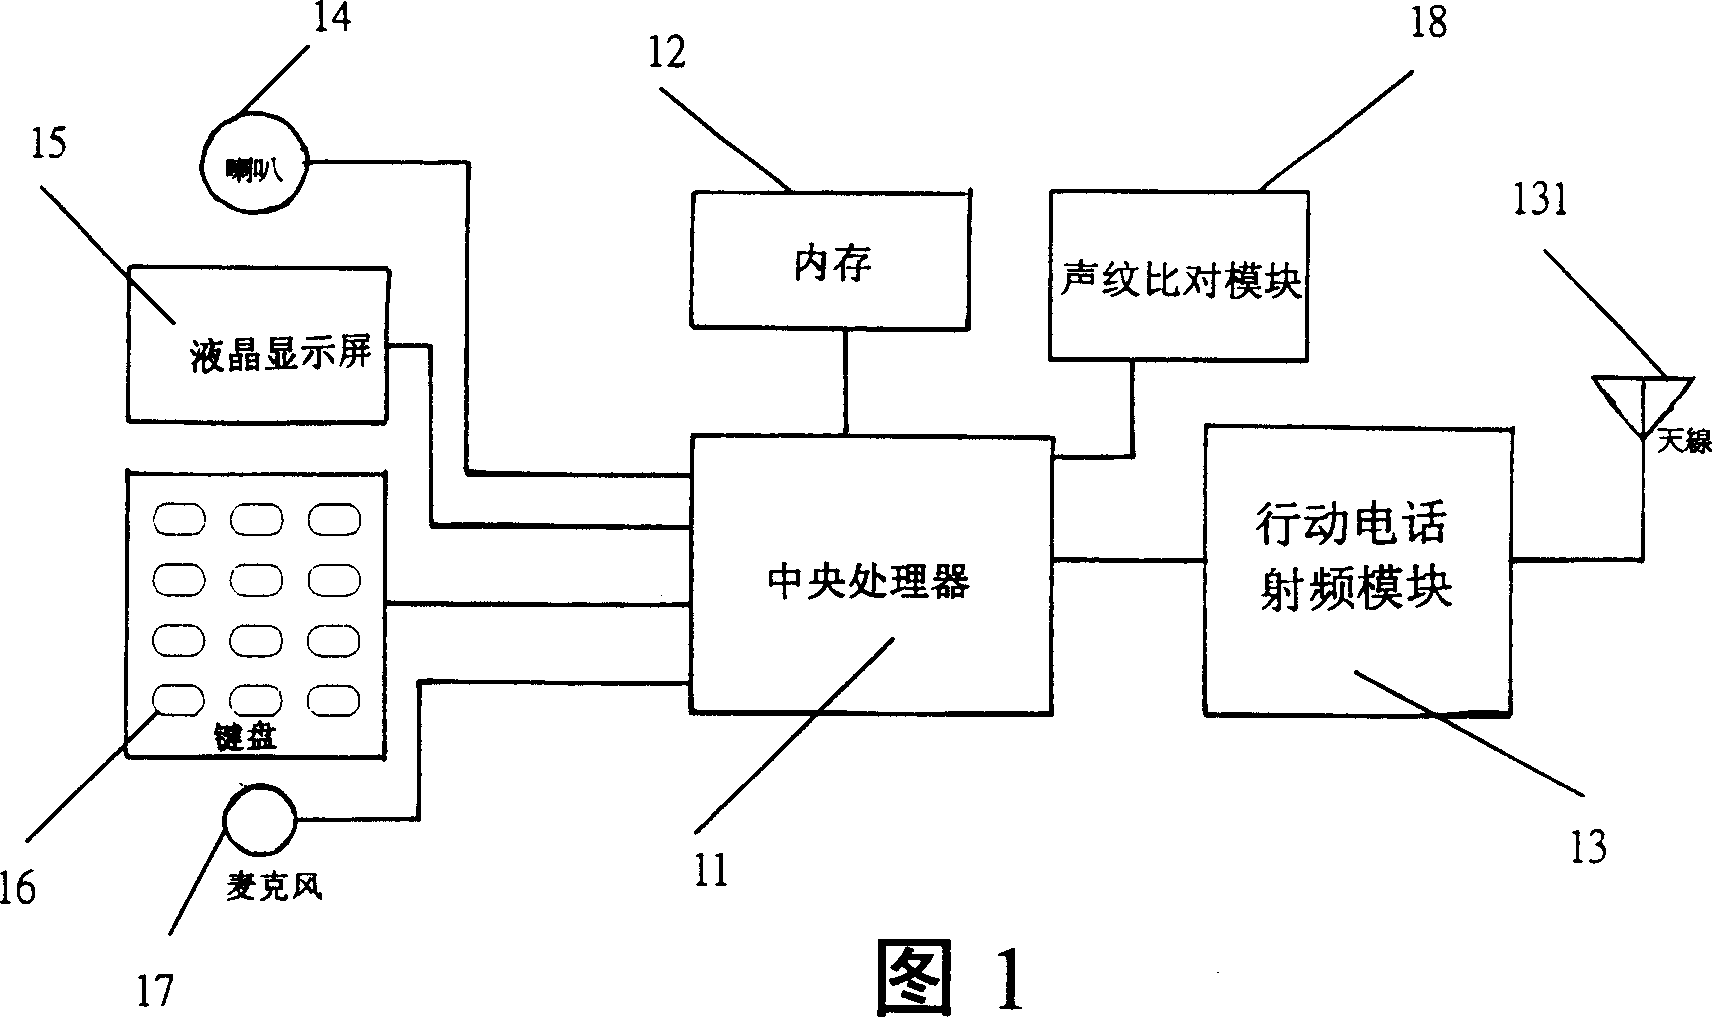 Method of unolocking mobile phone by sound and mobile phone having speech sound identification lock